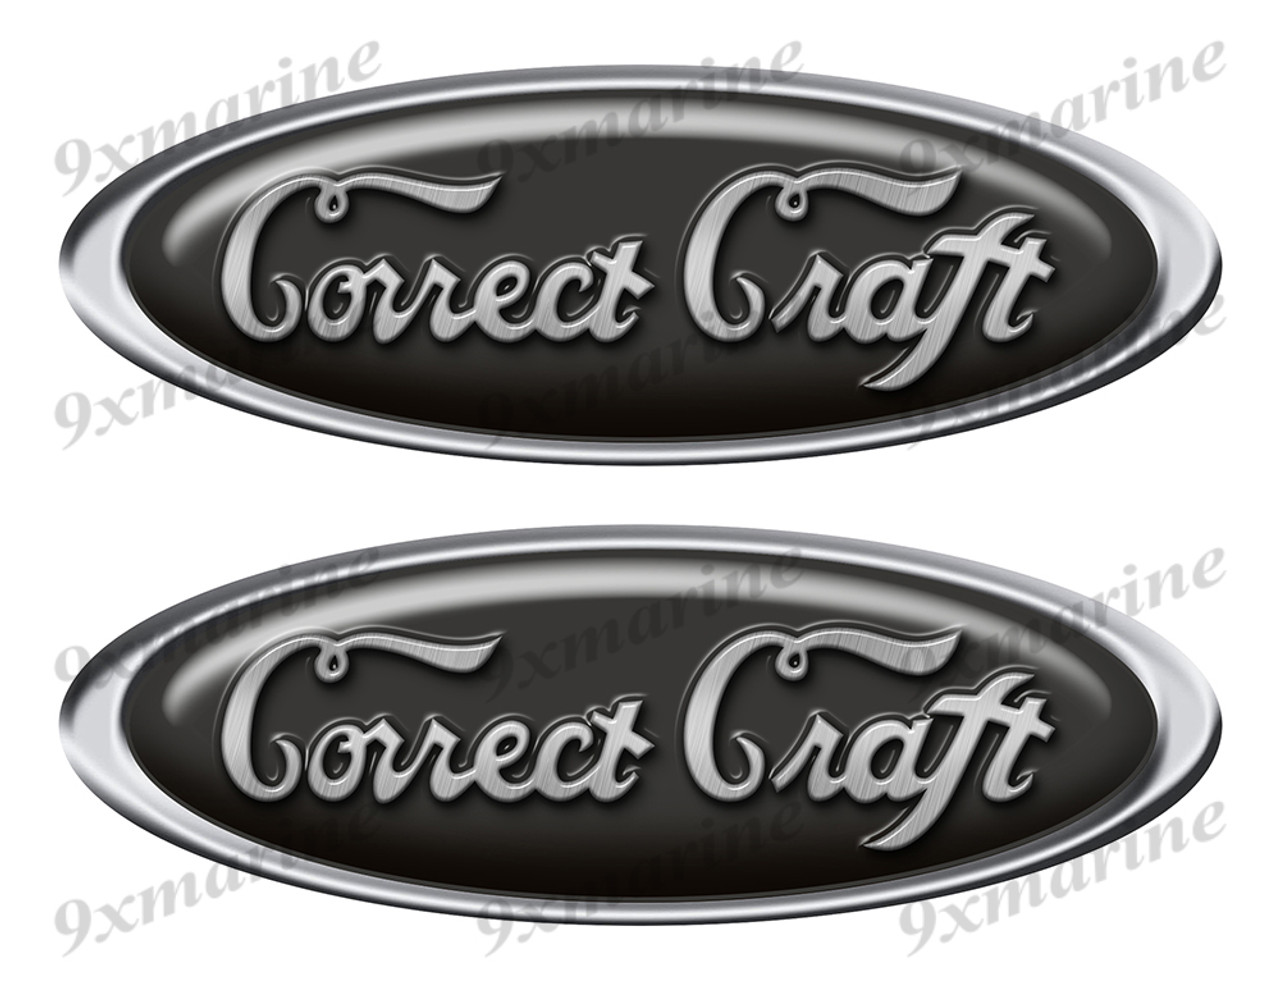 Two Correct Craft Classic Oval Stickers 10" long